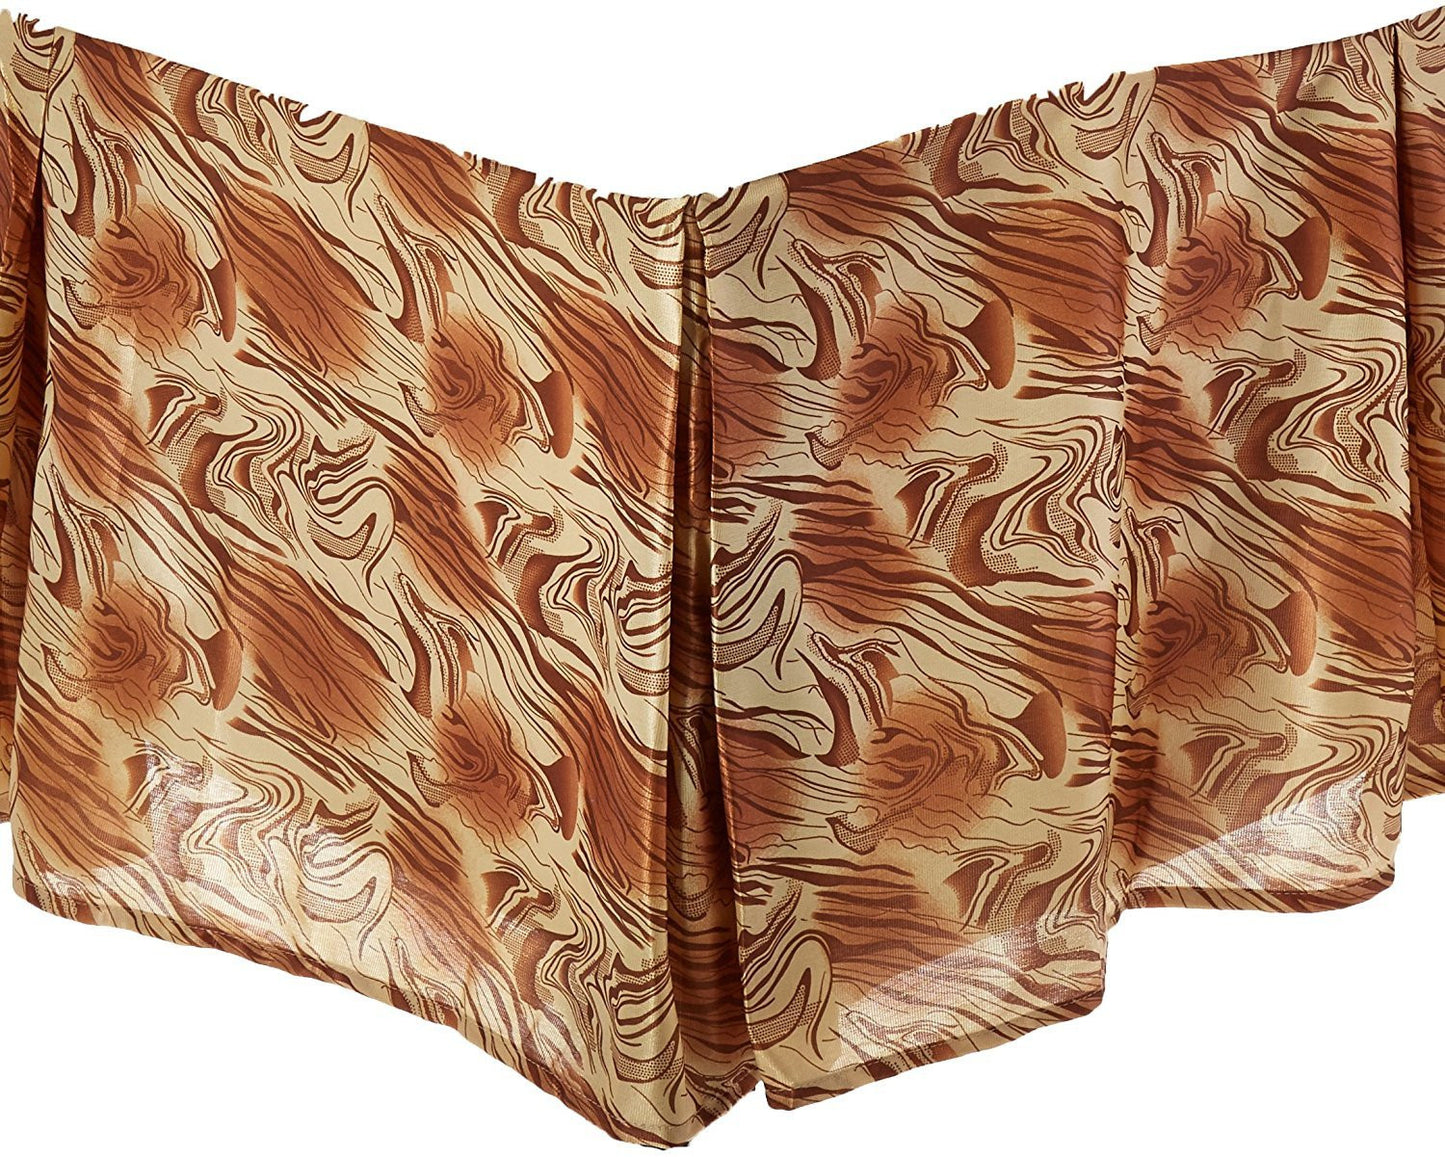 Floral Botanic Shiny Gold & Bronze Brown Dust Ruffle Pleated Bed Skirt - 14" Drop  (BS-BM6169L-1) - Stores Basement - Discount Bedding